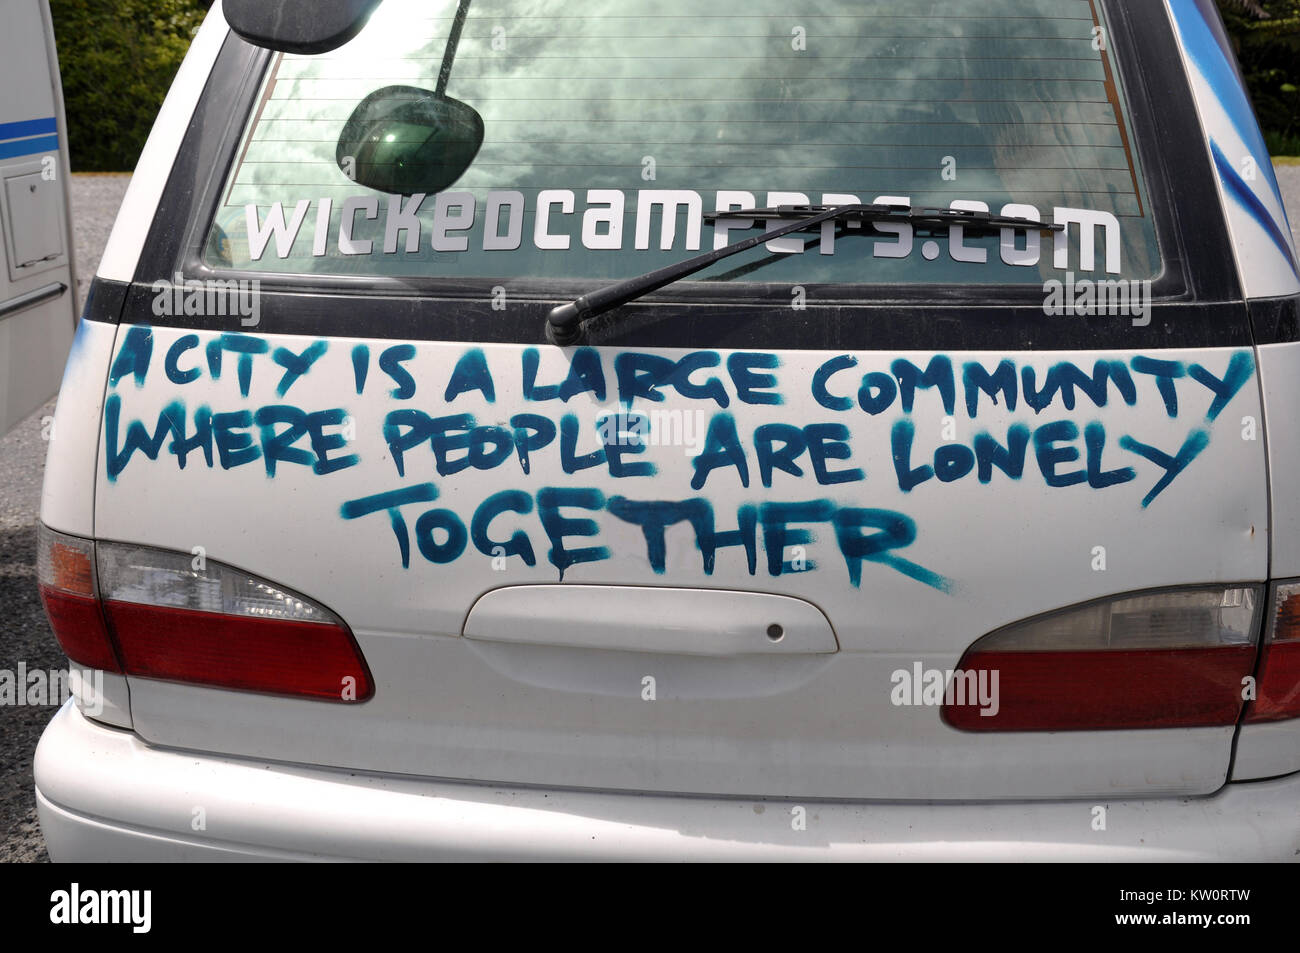 Signage on van: A city is a large community where people are lonely together Stock Photo